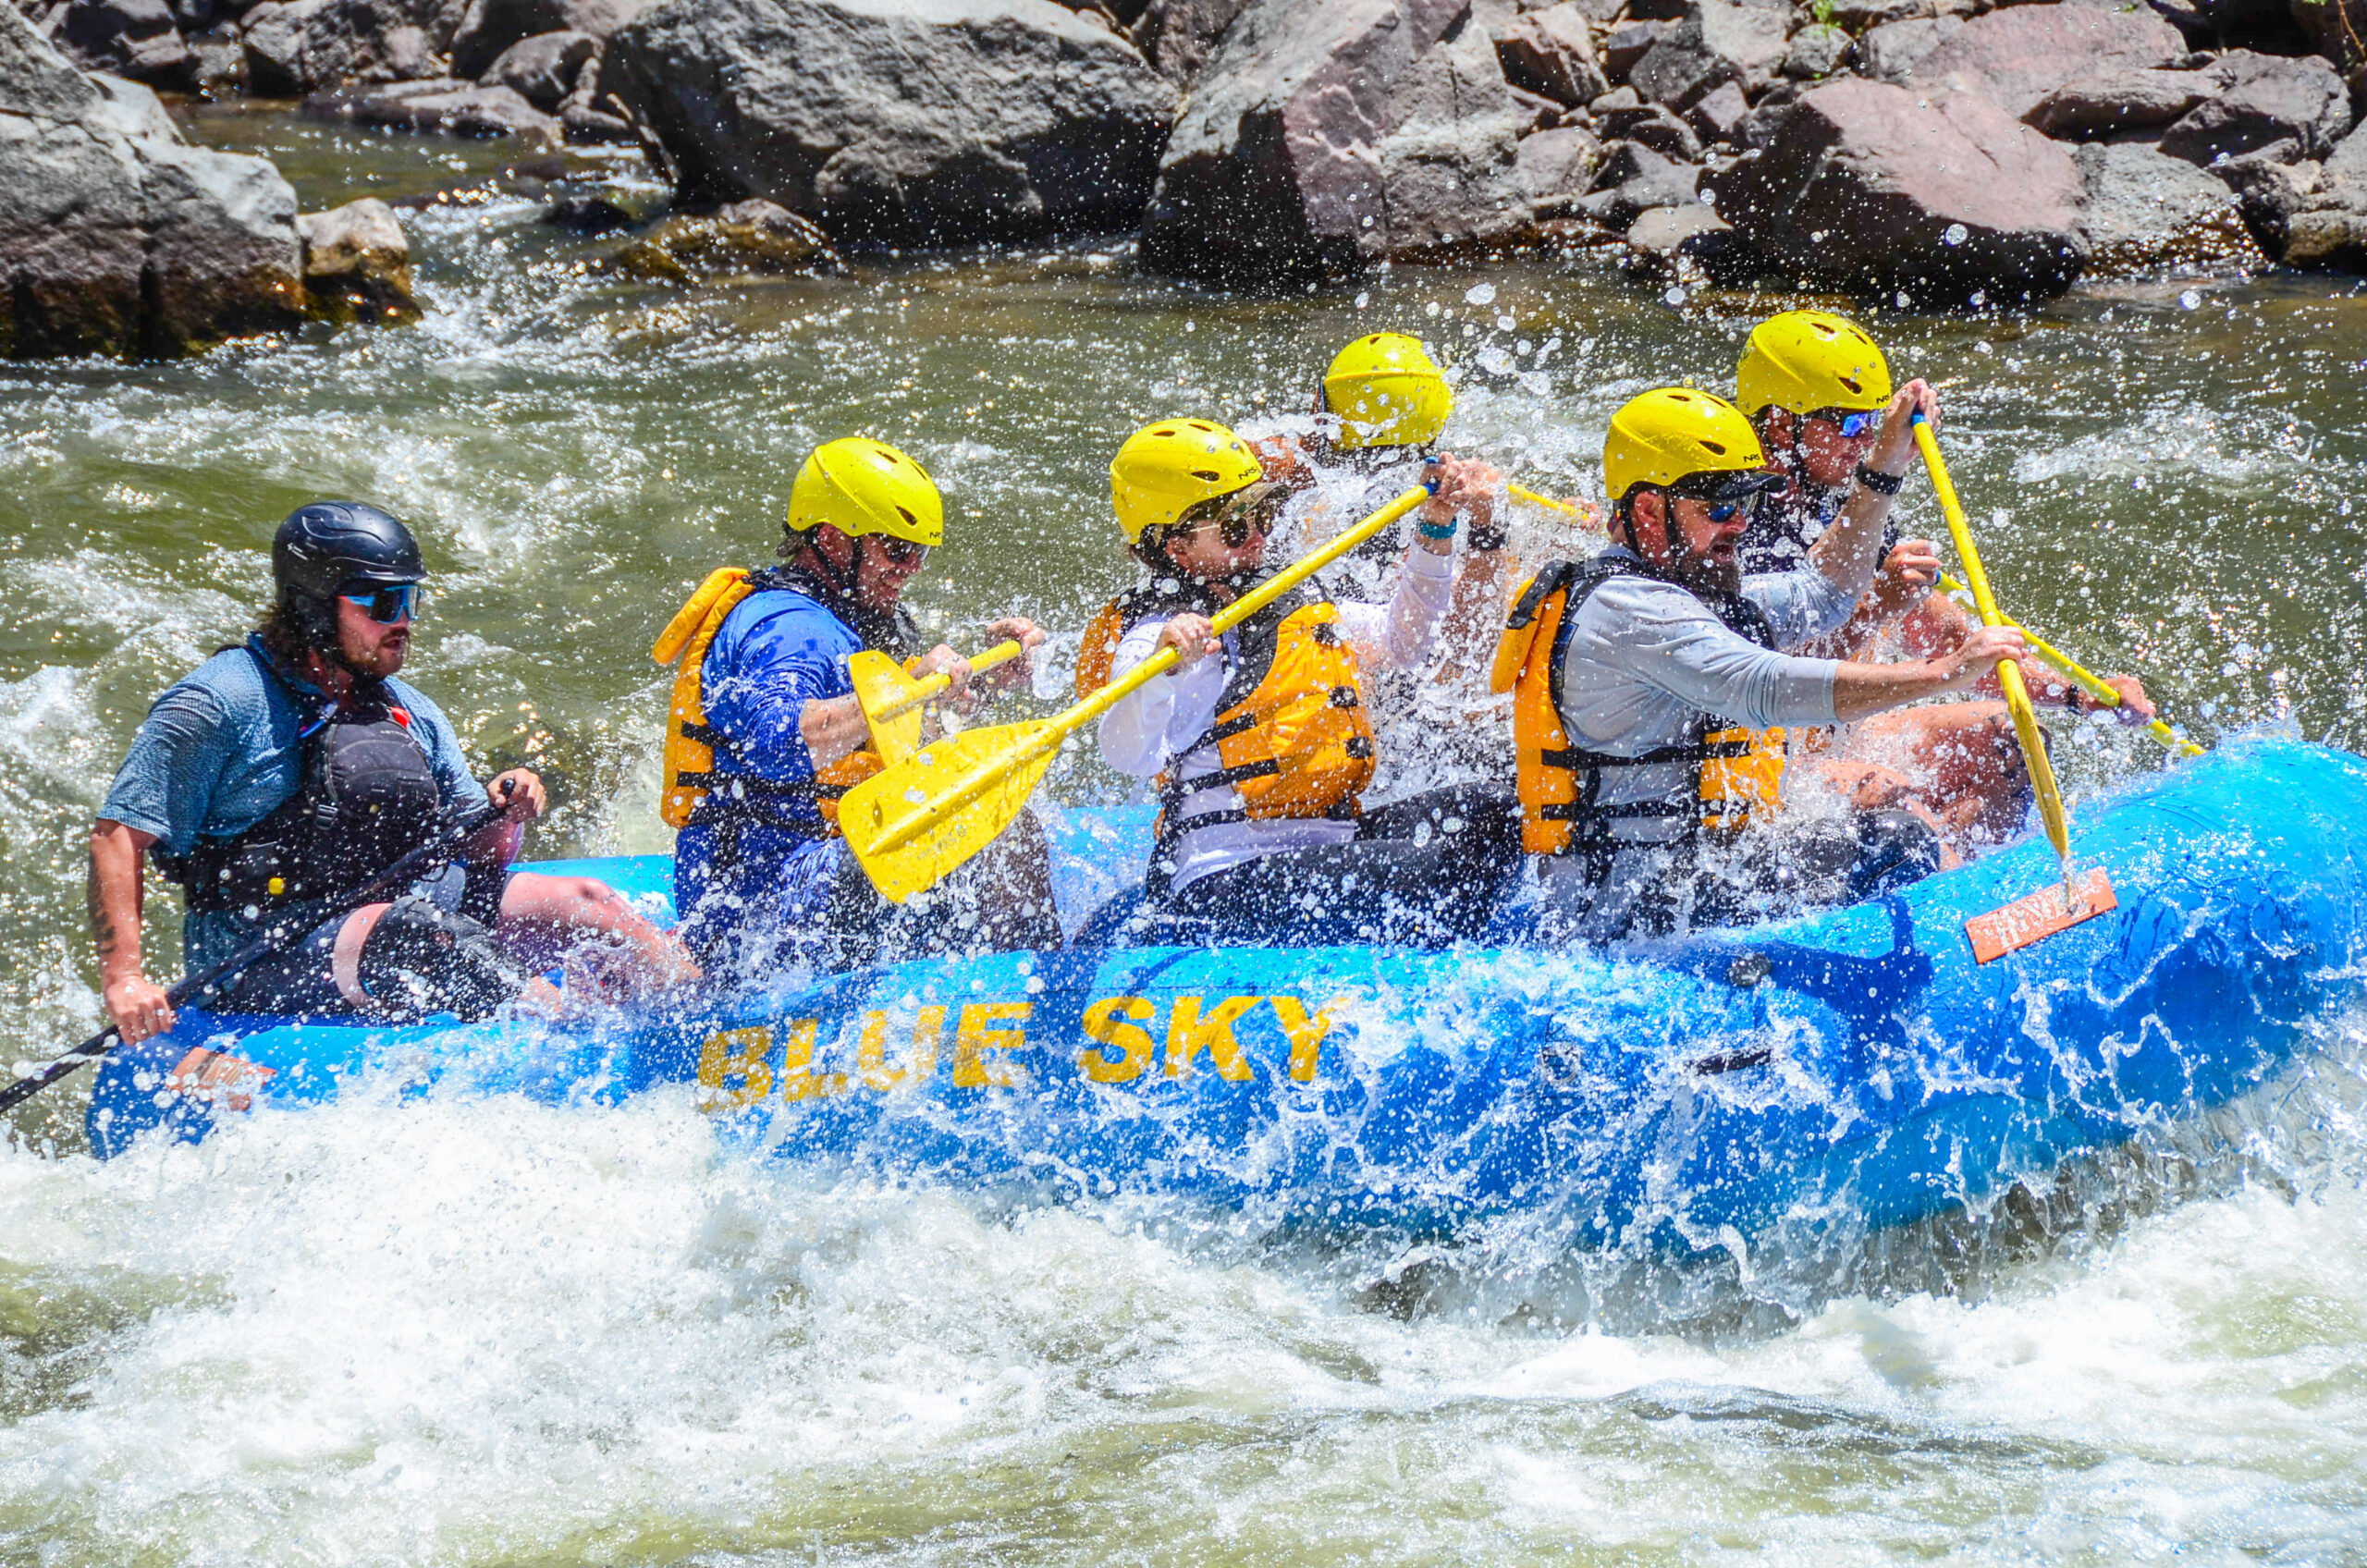 In this compelling image, a proficient guide expertly directs a fully occupied boat from the rear as participants paddle through the whitewater together. Cloaked in life jackets and helmets, the group showcases seamless teamwork, with water splashing around them, capturing the dynamic and exhilarating essence of their adventure.